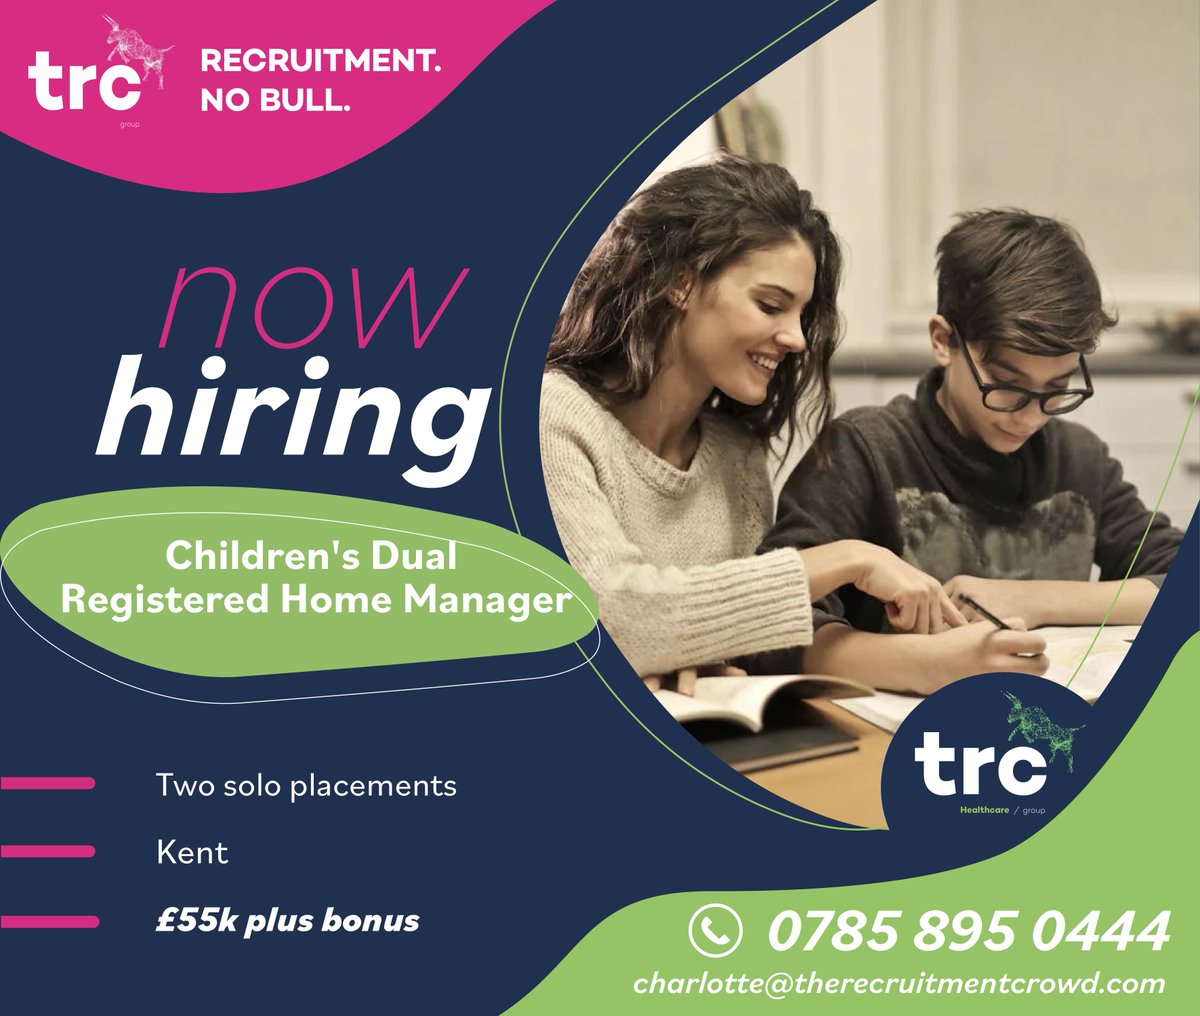 Our client is looking to recruit a Children's Dual Registered Home Manager based in Kent. Interested? Get in touch with Charlotte Proud or apply via our website 👉 therecruitmentcrowd.com/job-search/ #kent #therecruitmentcrowd #nobull